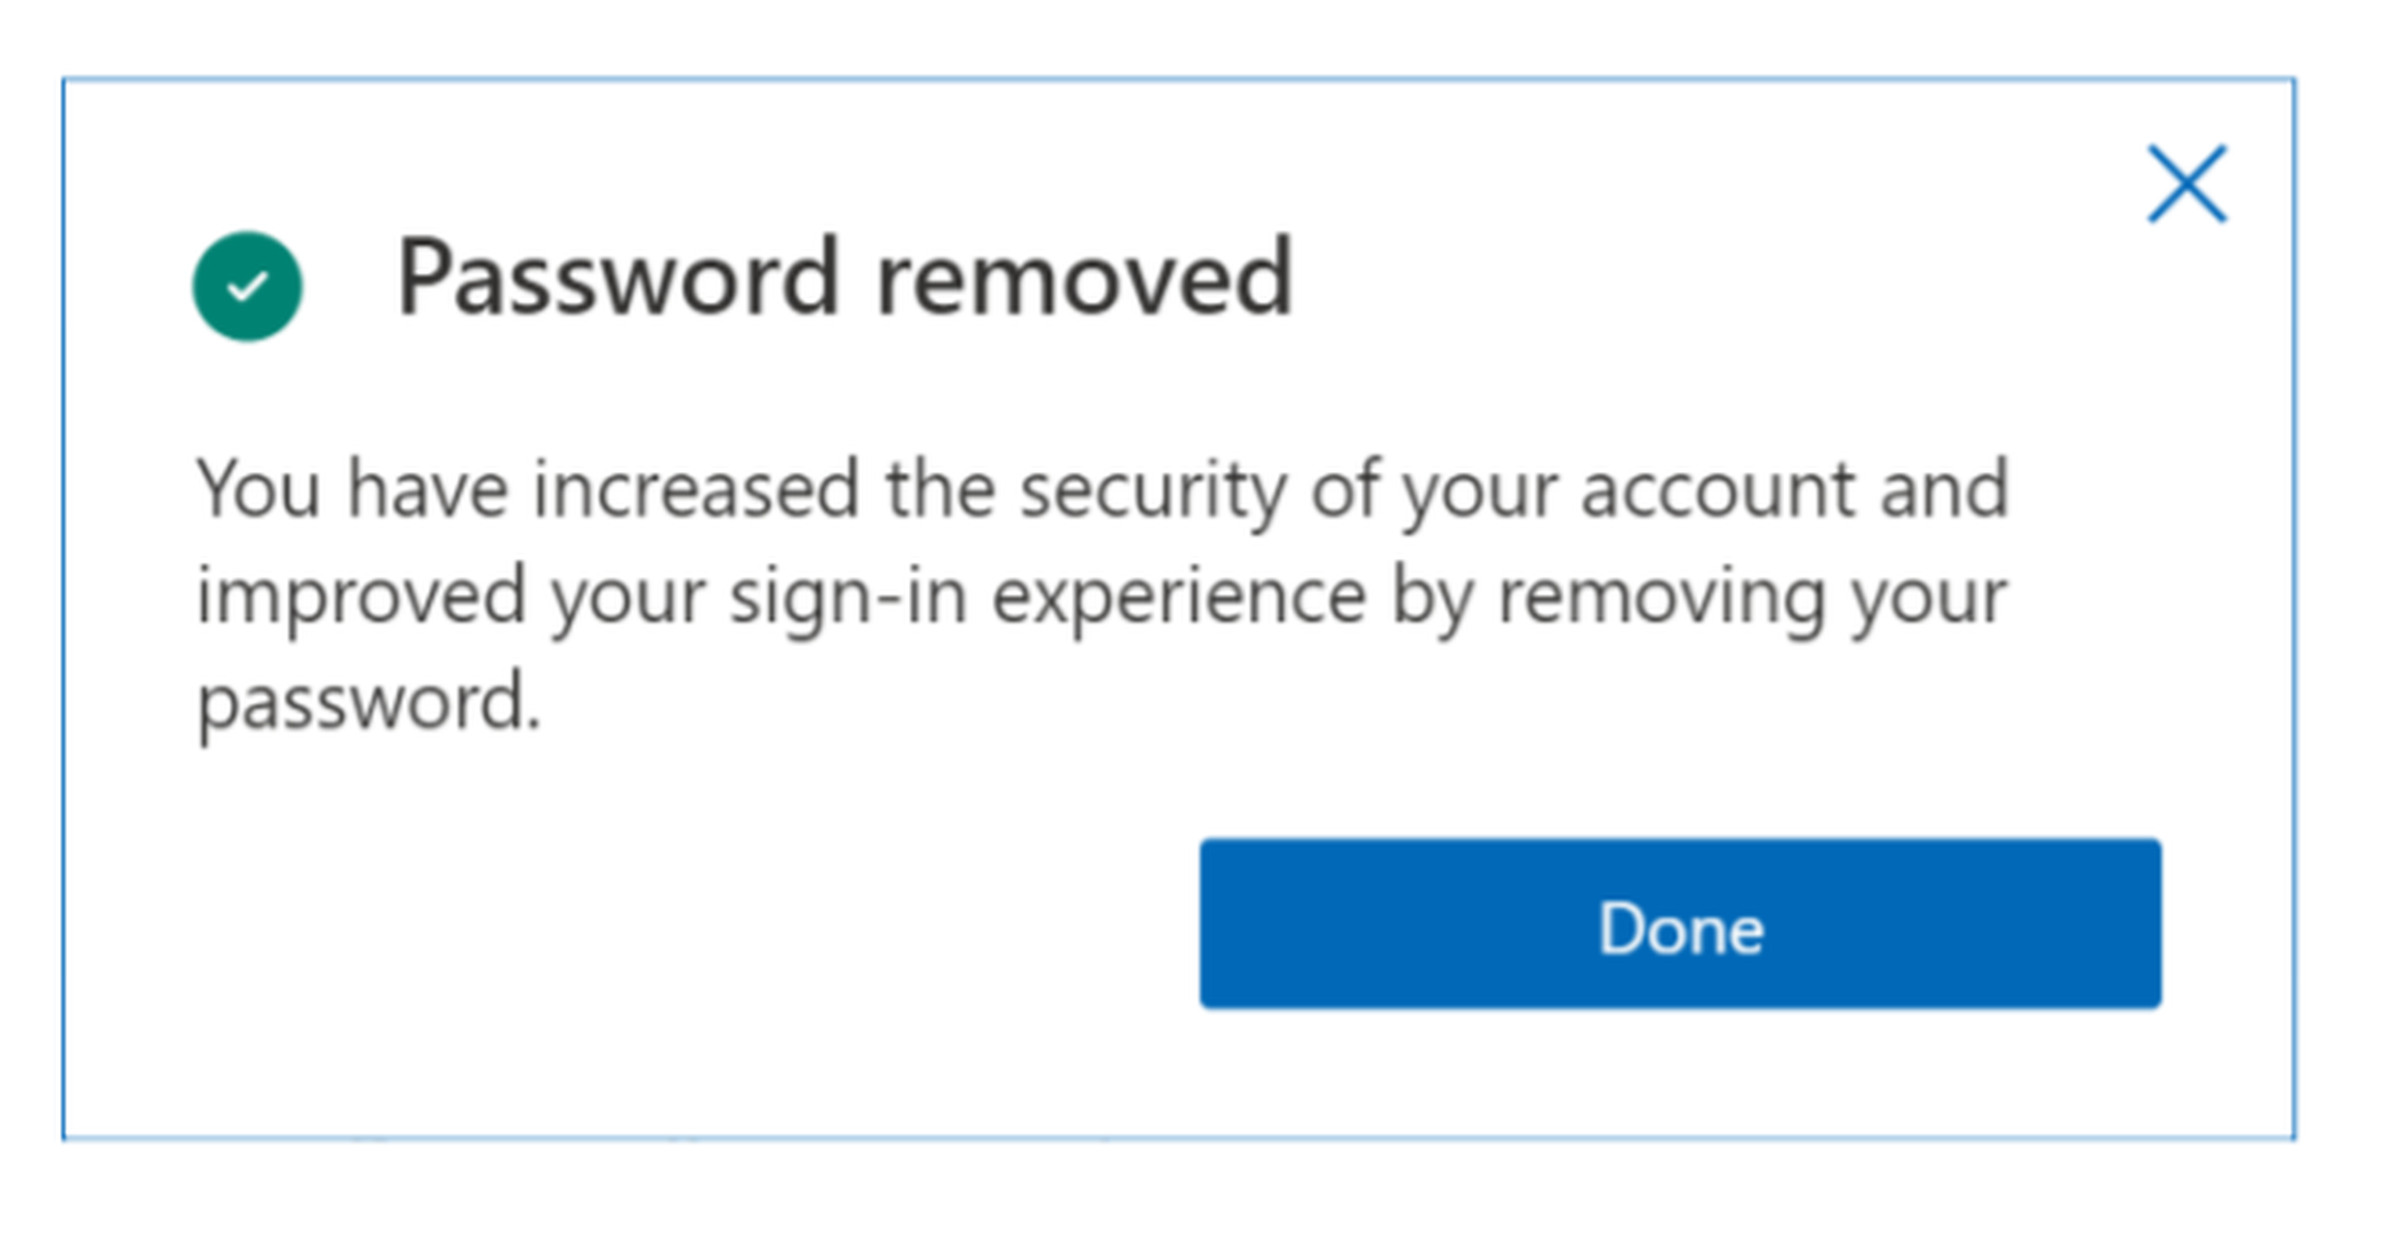 Microsoft will let you fully remove a password from your account.